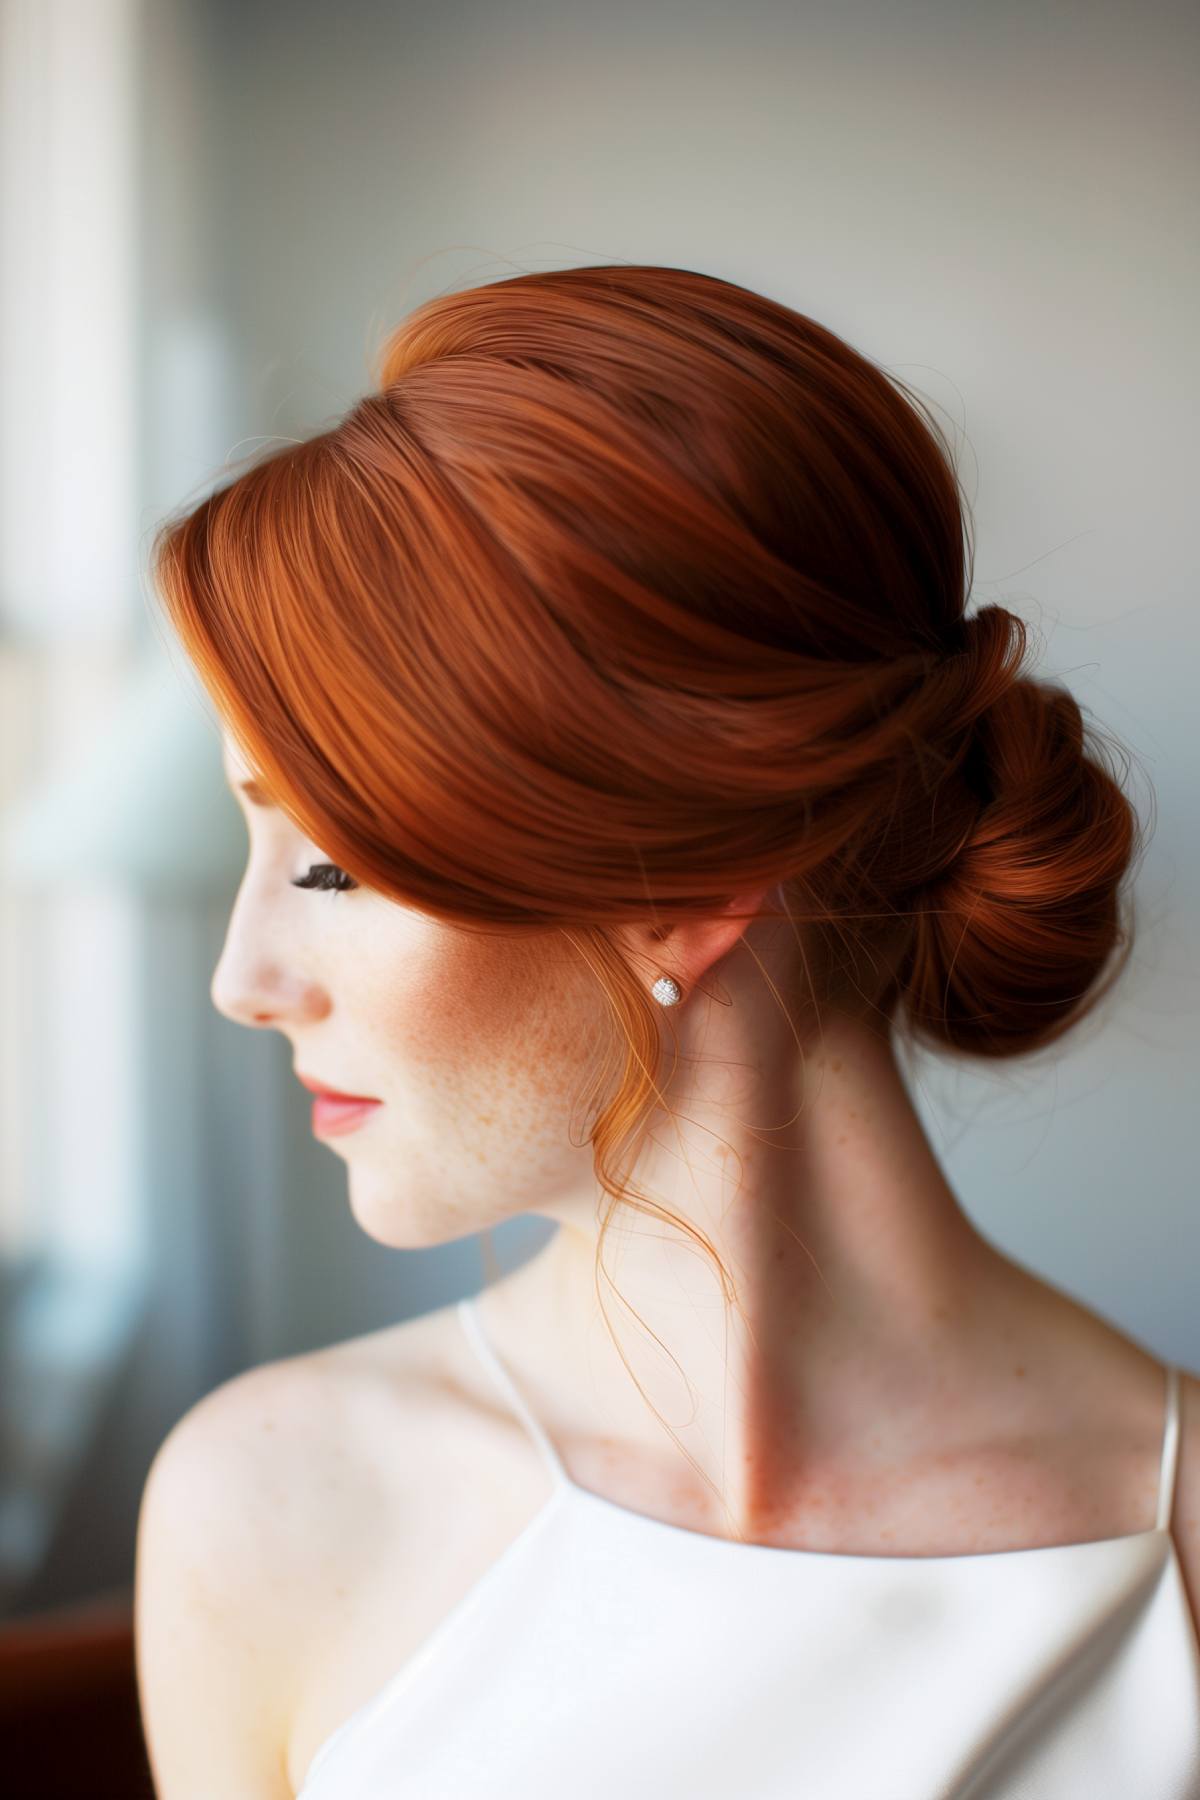 Elegant simple tucked roll updo in vibrant copper, ideal for elongating the neck and complementing formal attire.